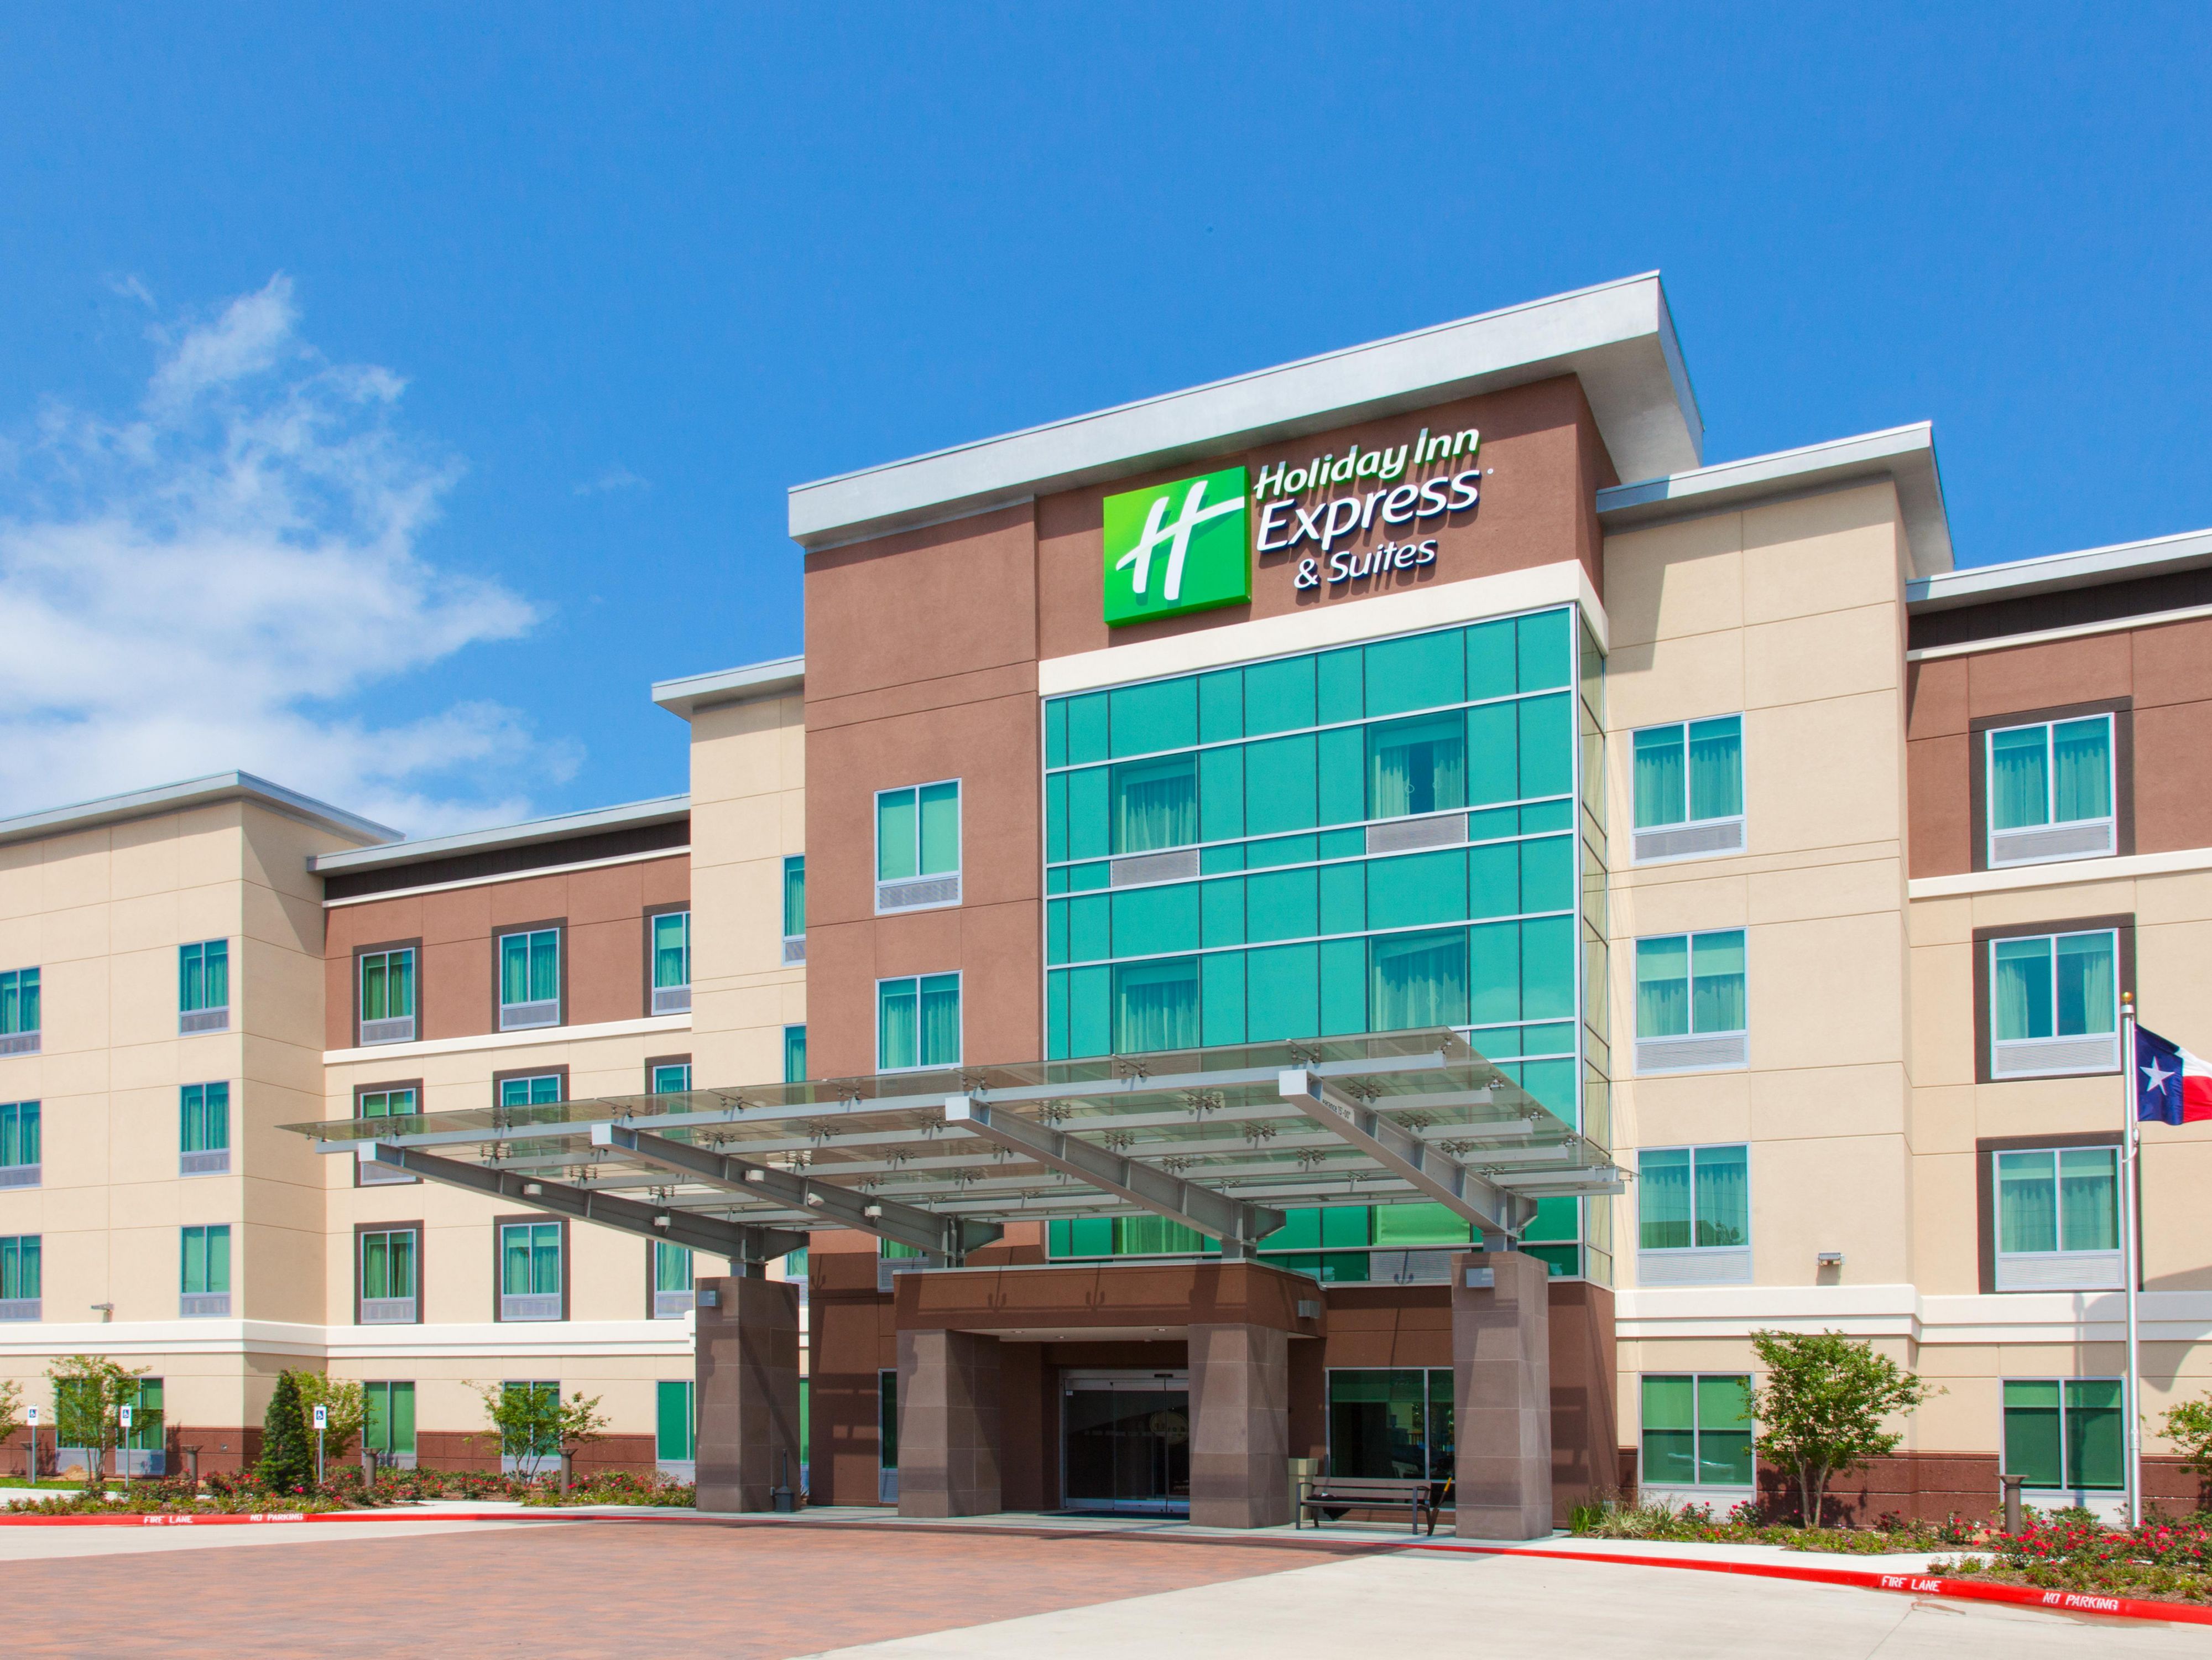 Holiday Inn Express And Suites Houston 4549053156 4x3